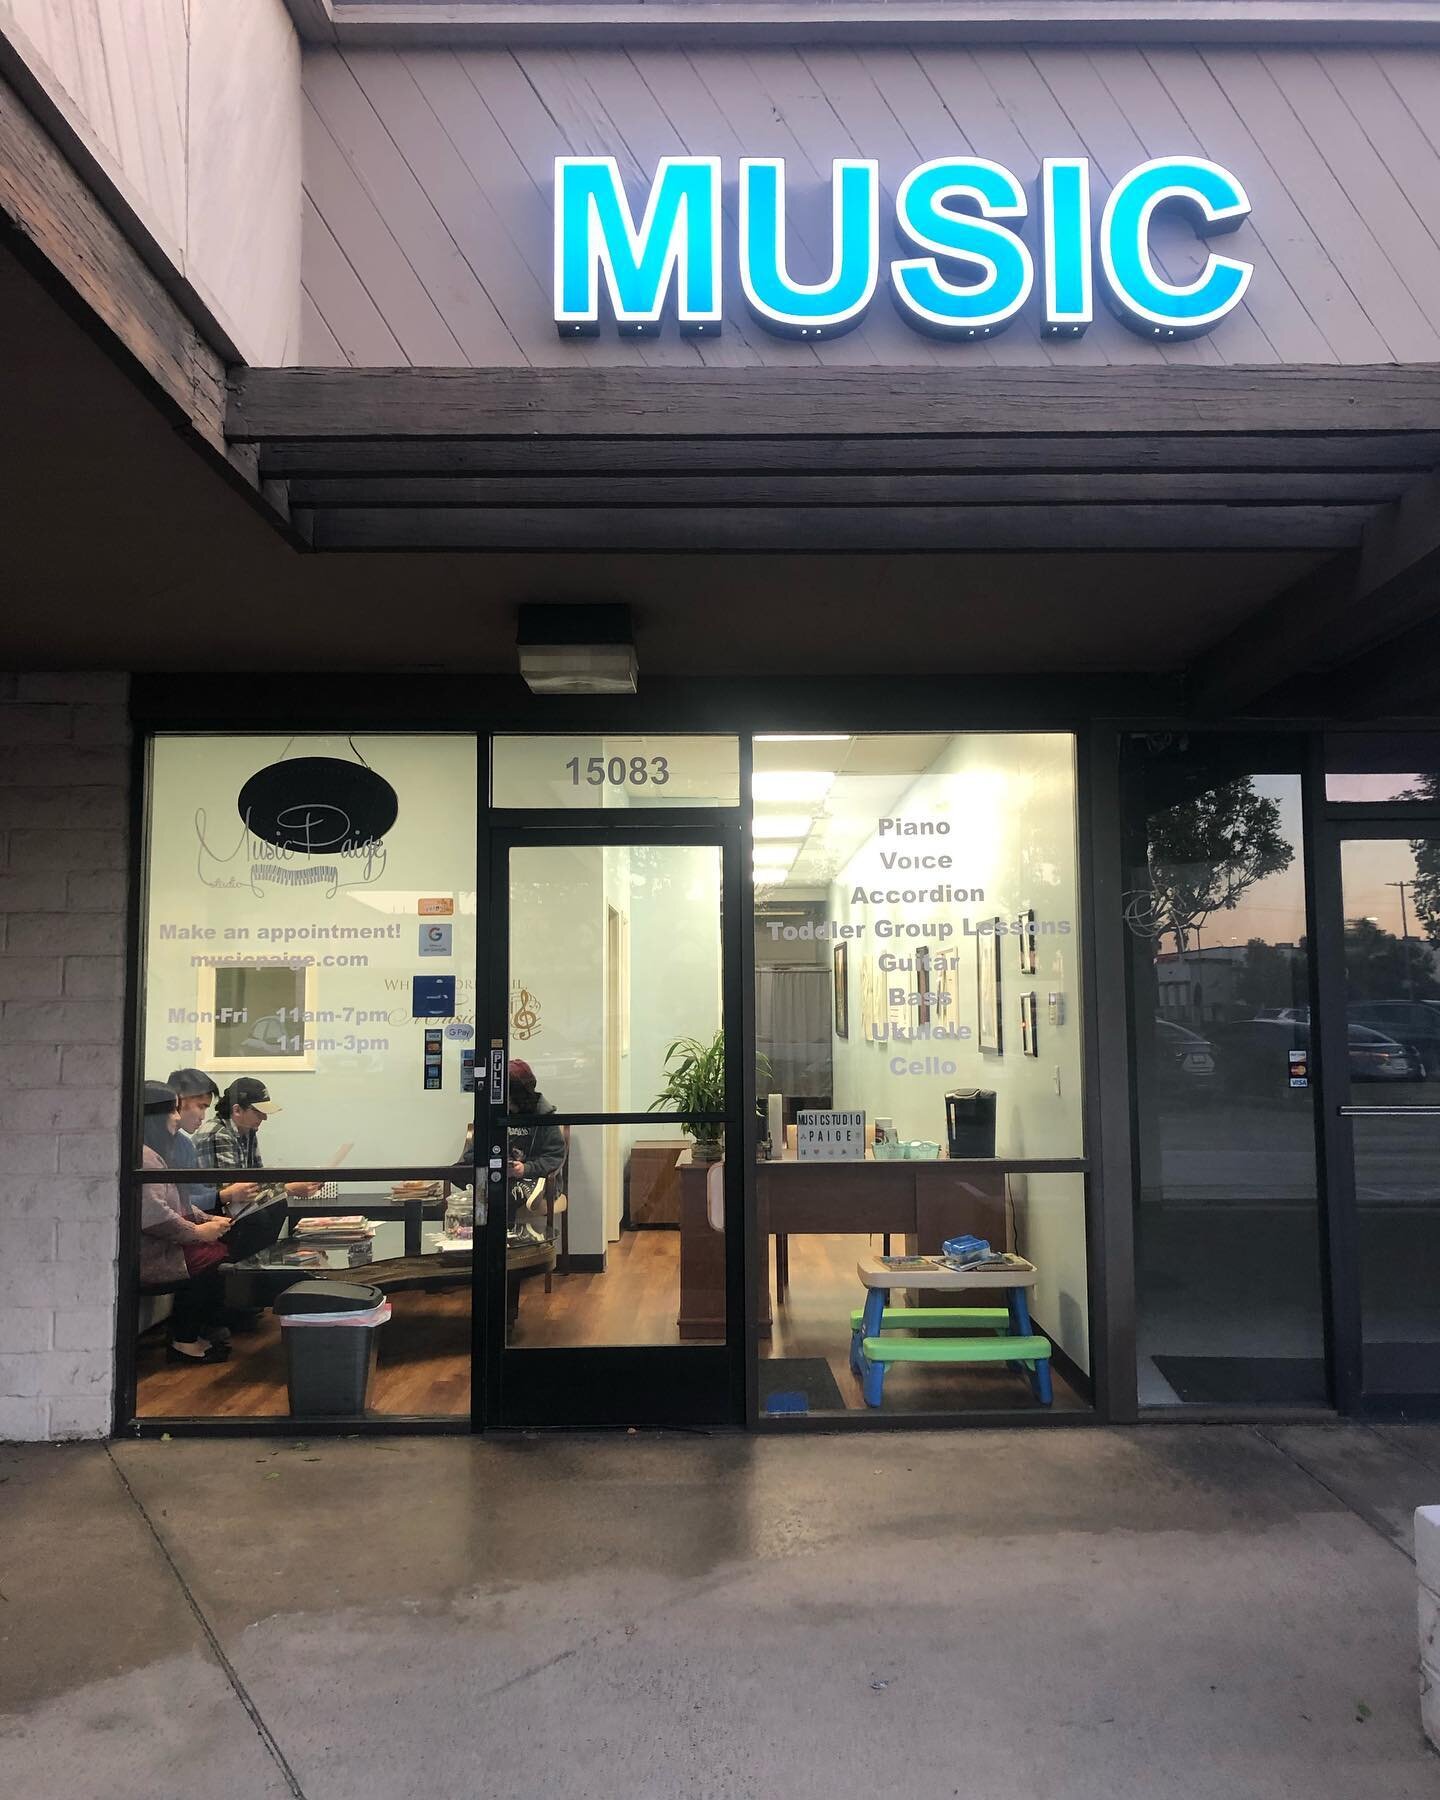 This January our studio turned 3 years old. Swipe for a terrible photo of me when we first opened lol. We opened January 2020 right before the pandemic, and somehow we are still standing. It&rsquo;s been a stressful, but also very rewarding journey, 